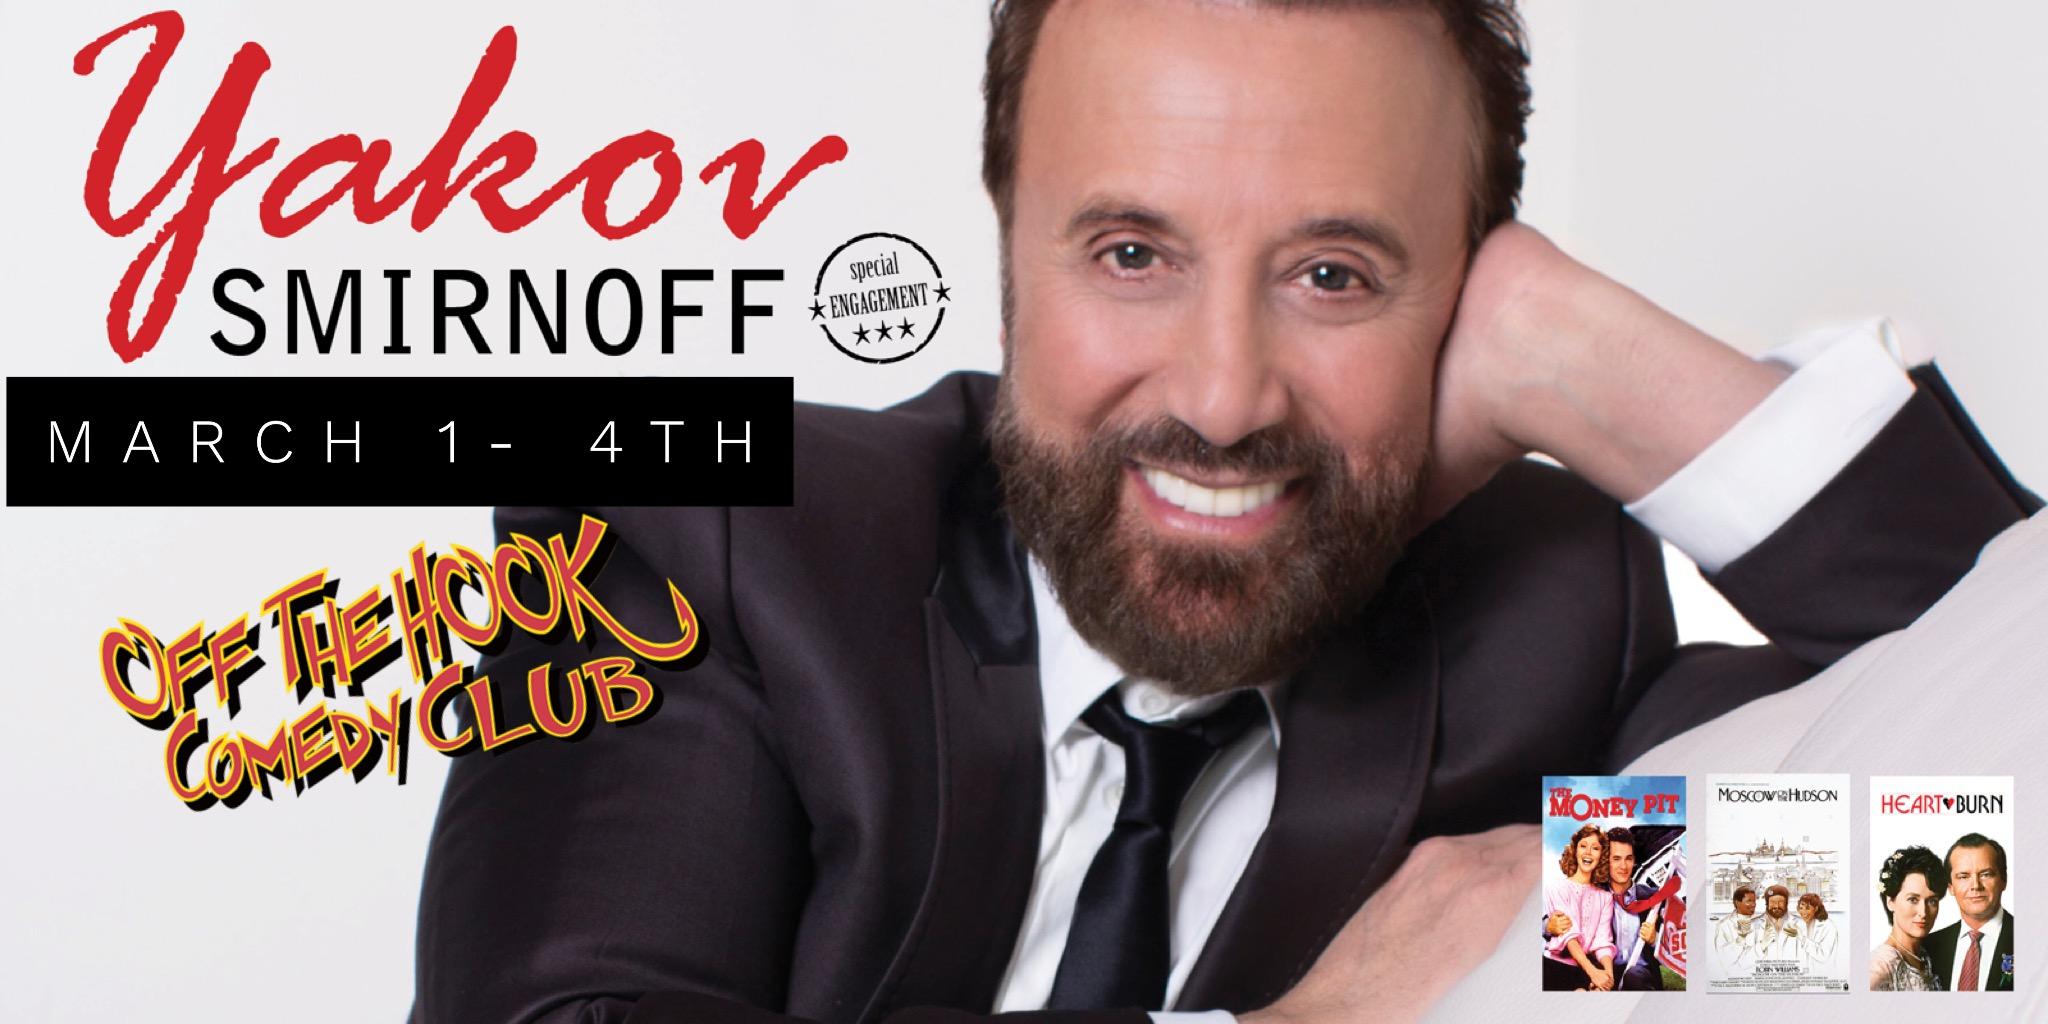 Comedian Yakov Smirnoff Live in Naples, Fl at Off The Hook Comedy Club